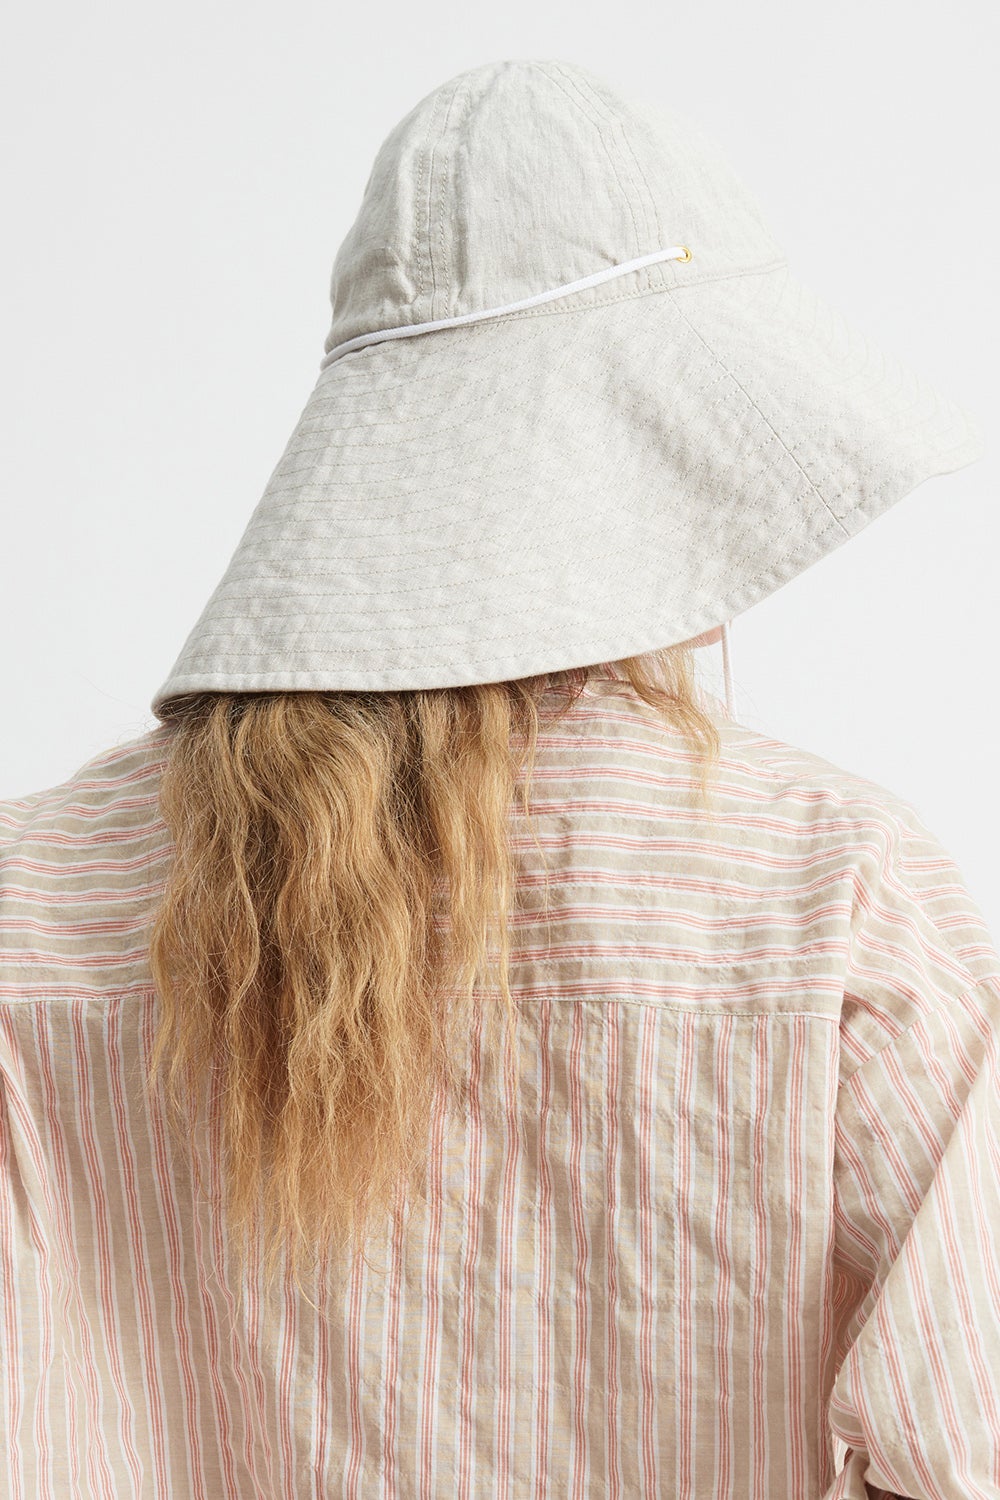 Embroidered Runaway Girl Sou'wester Hat